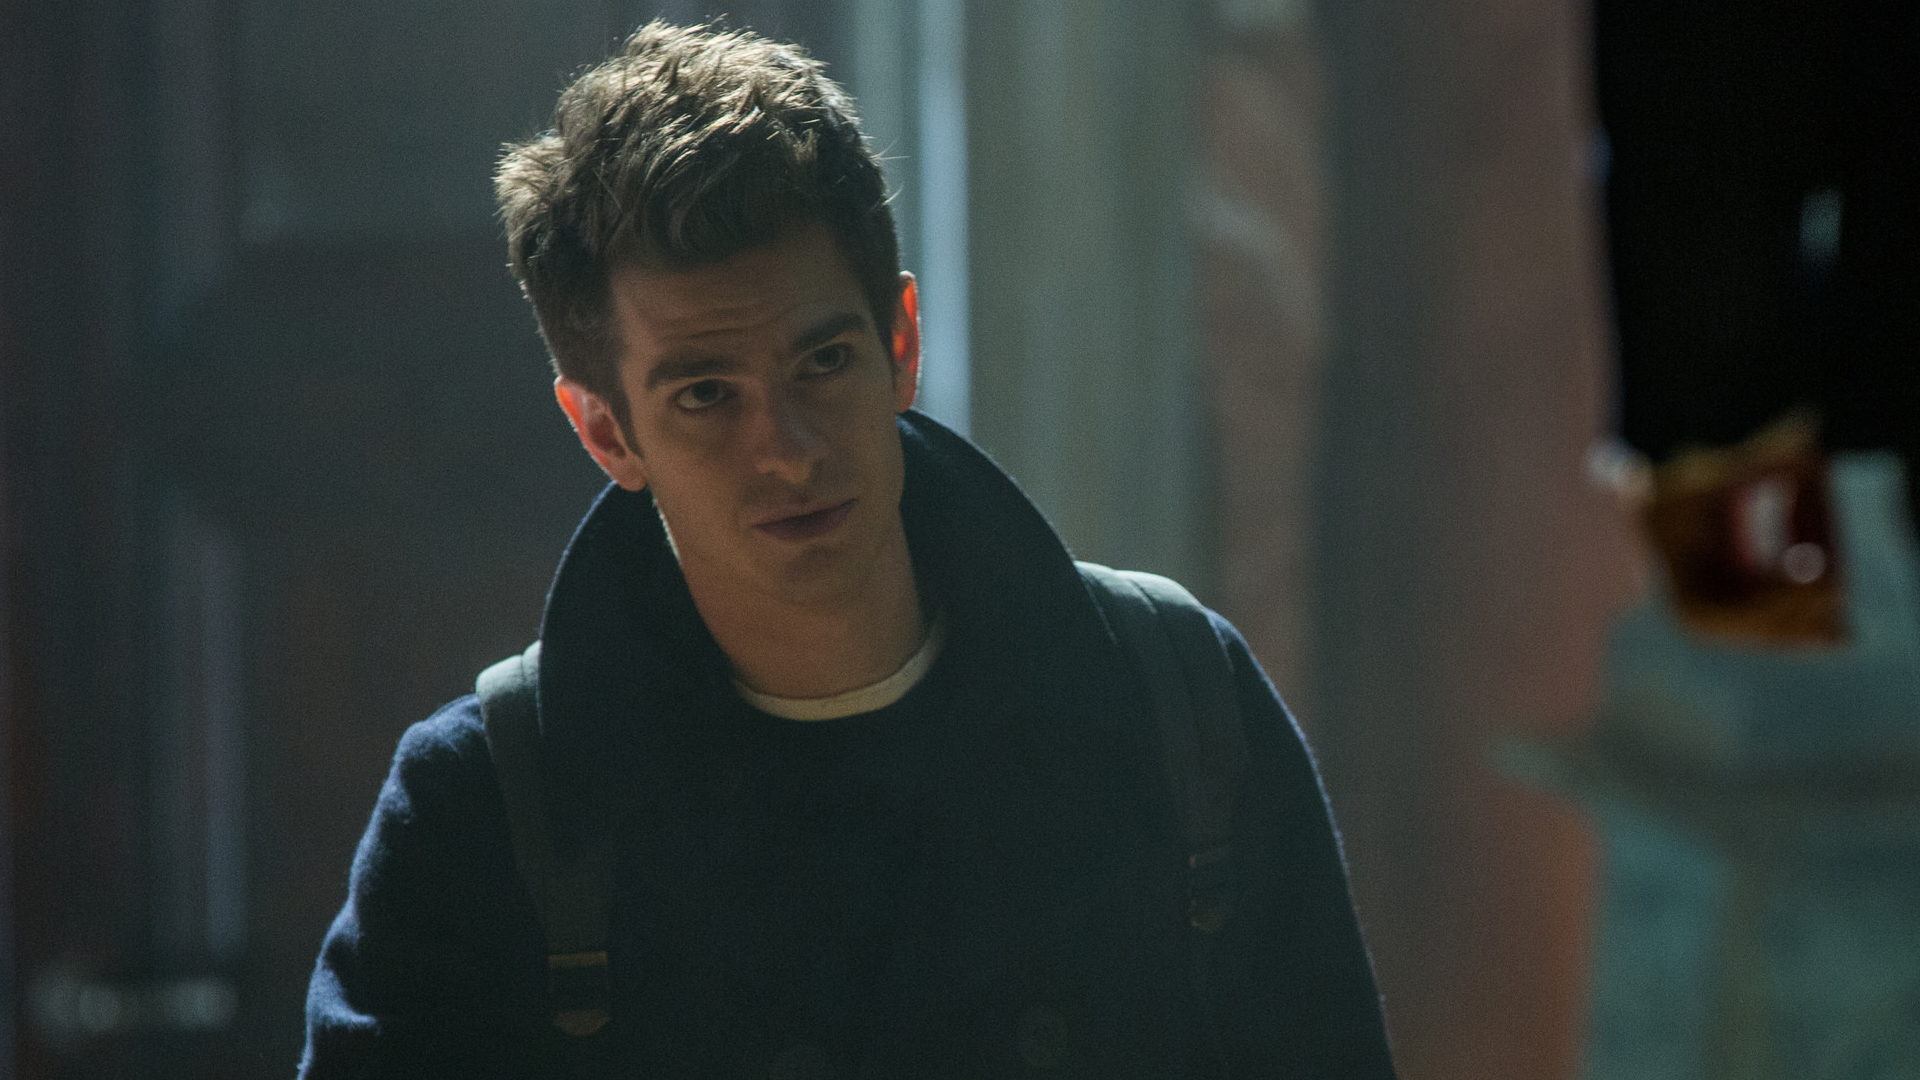 andrew garfield as peter parker in the amazing spider man 2 movie hd 1920x1080